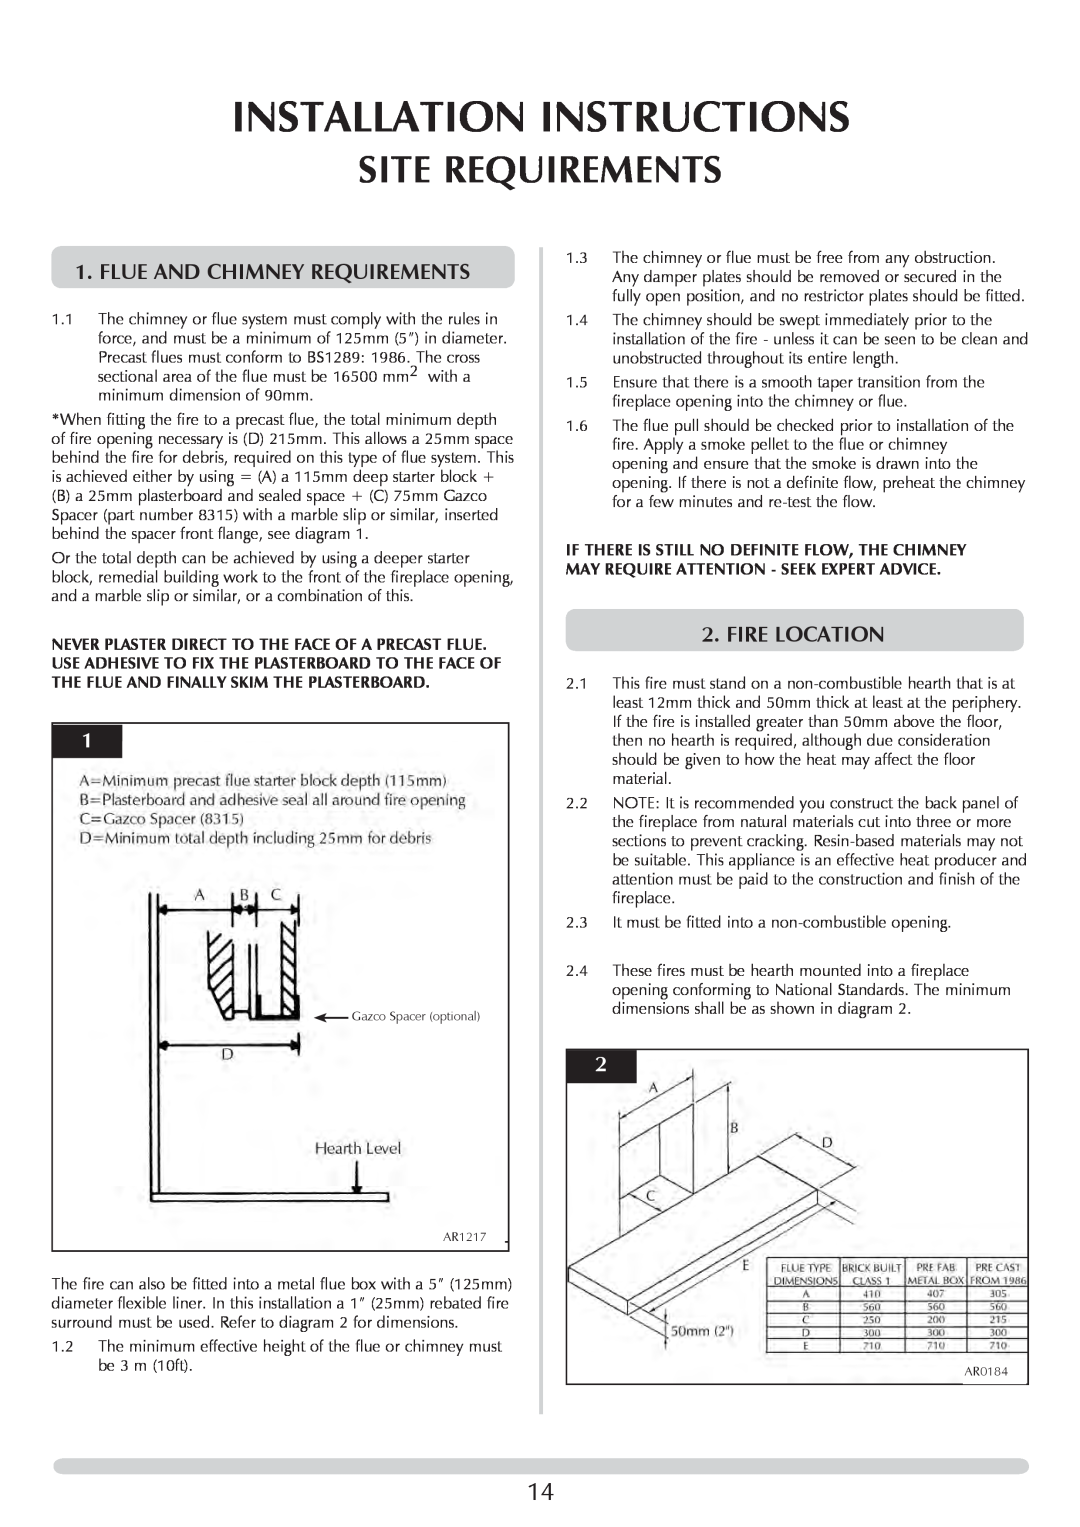 Stovax PR0741 manual Site Requirements, Installation Instructions, Flue And Chimney Requirements, Fire Location 